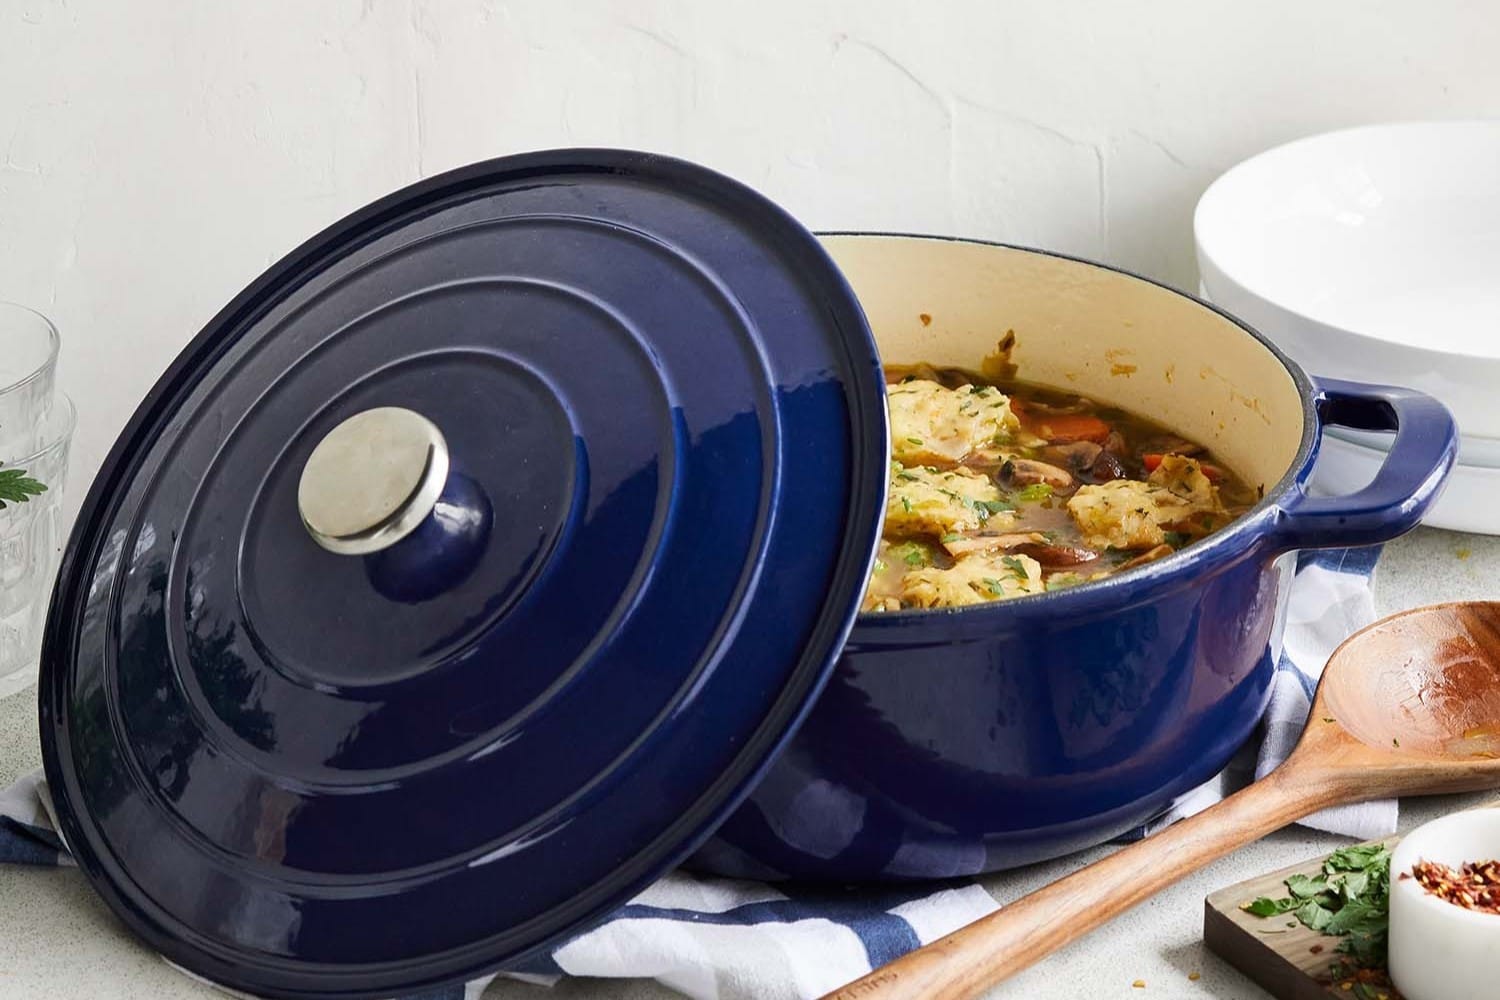 recipes to make in your cast iron skillet